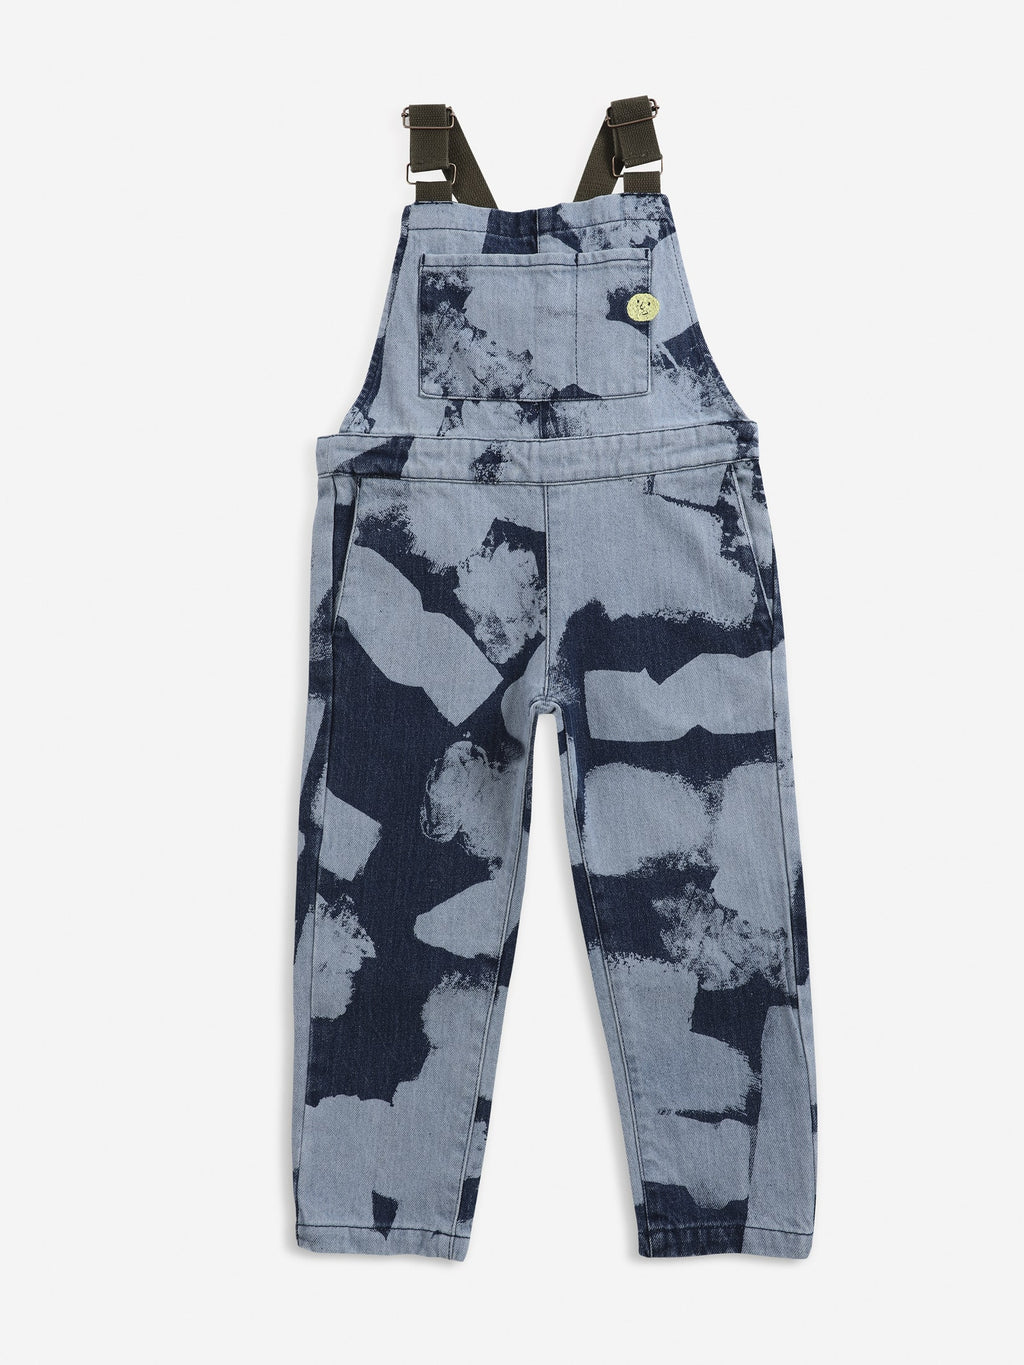 Bobo Choses Painting All Over Denim Dungaree